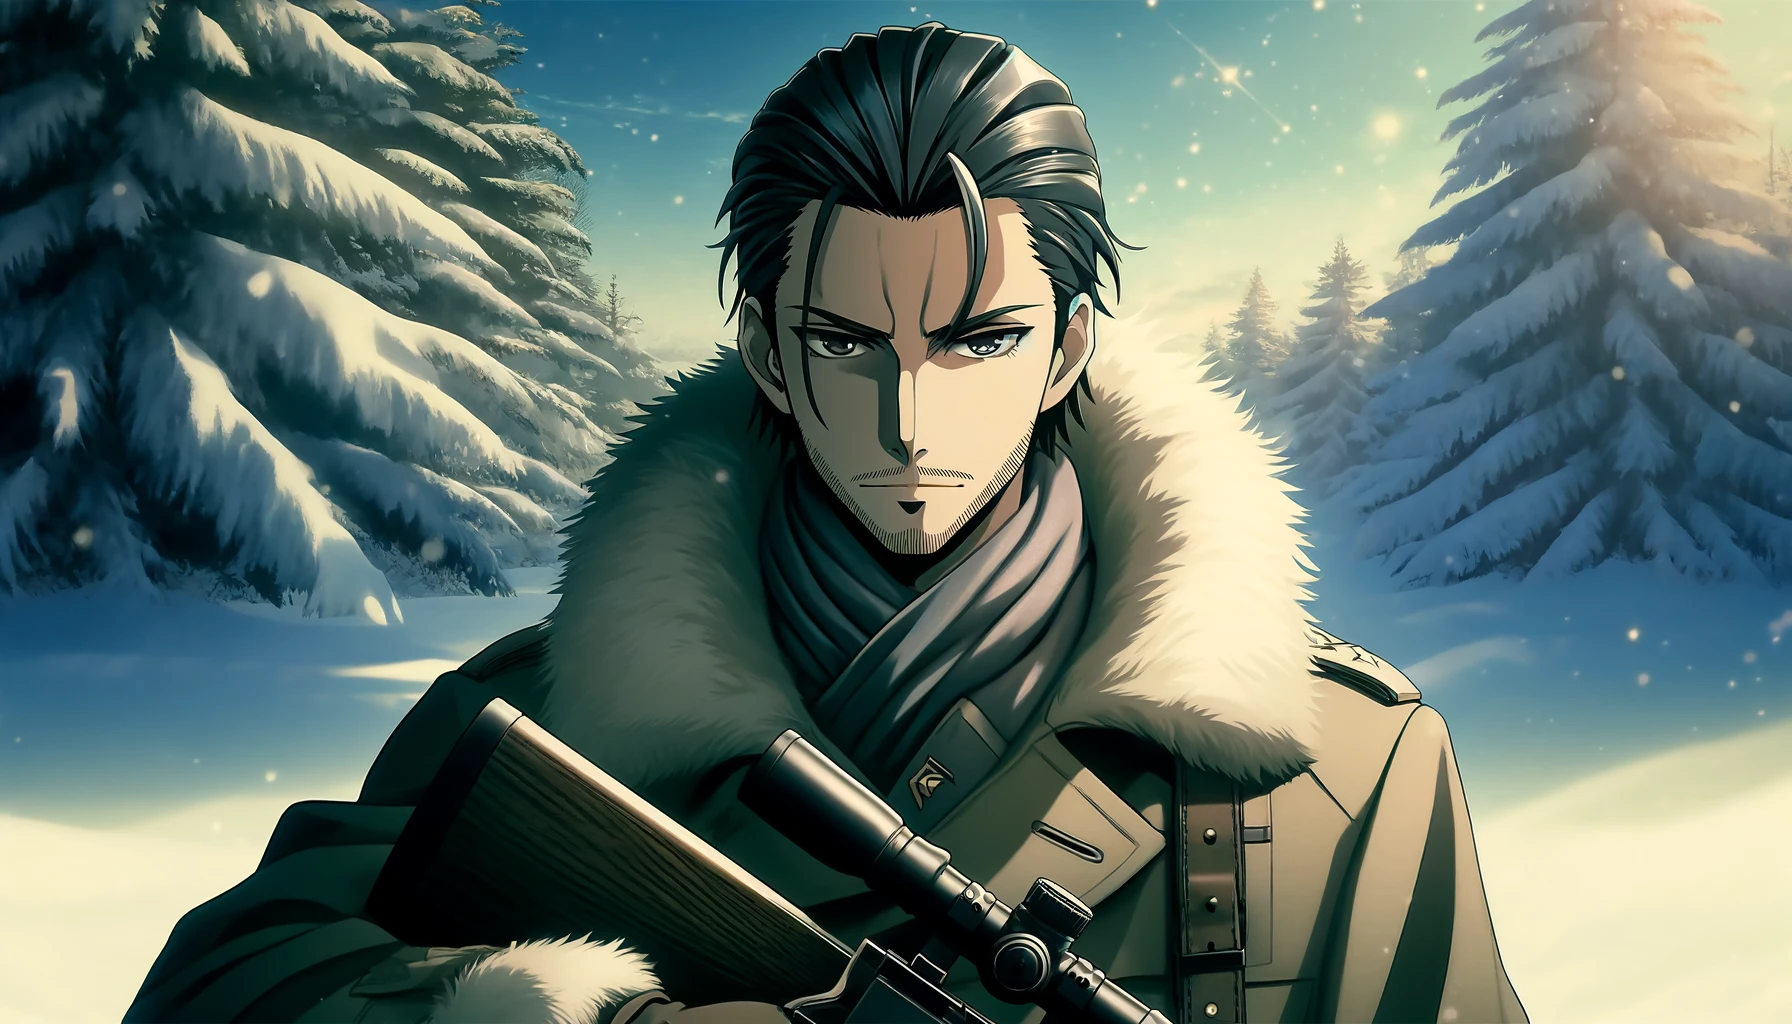 Anime-style image of a charismatic male character inspired by 'Golden Kamuy'. He has a sharp gaze, a rugged face with a scar, and a military uniform. The character stands in a snowy landscape, holding a rifle, exuding a sense of authority and mystery. His demeanor is cool and calculated, representing a sniper's precision and stoicism. The background features a wintry Hokkaido forest, adding to the harsh survival theme.